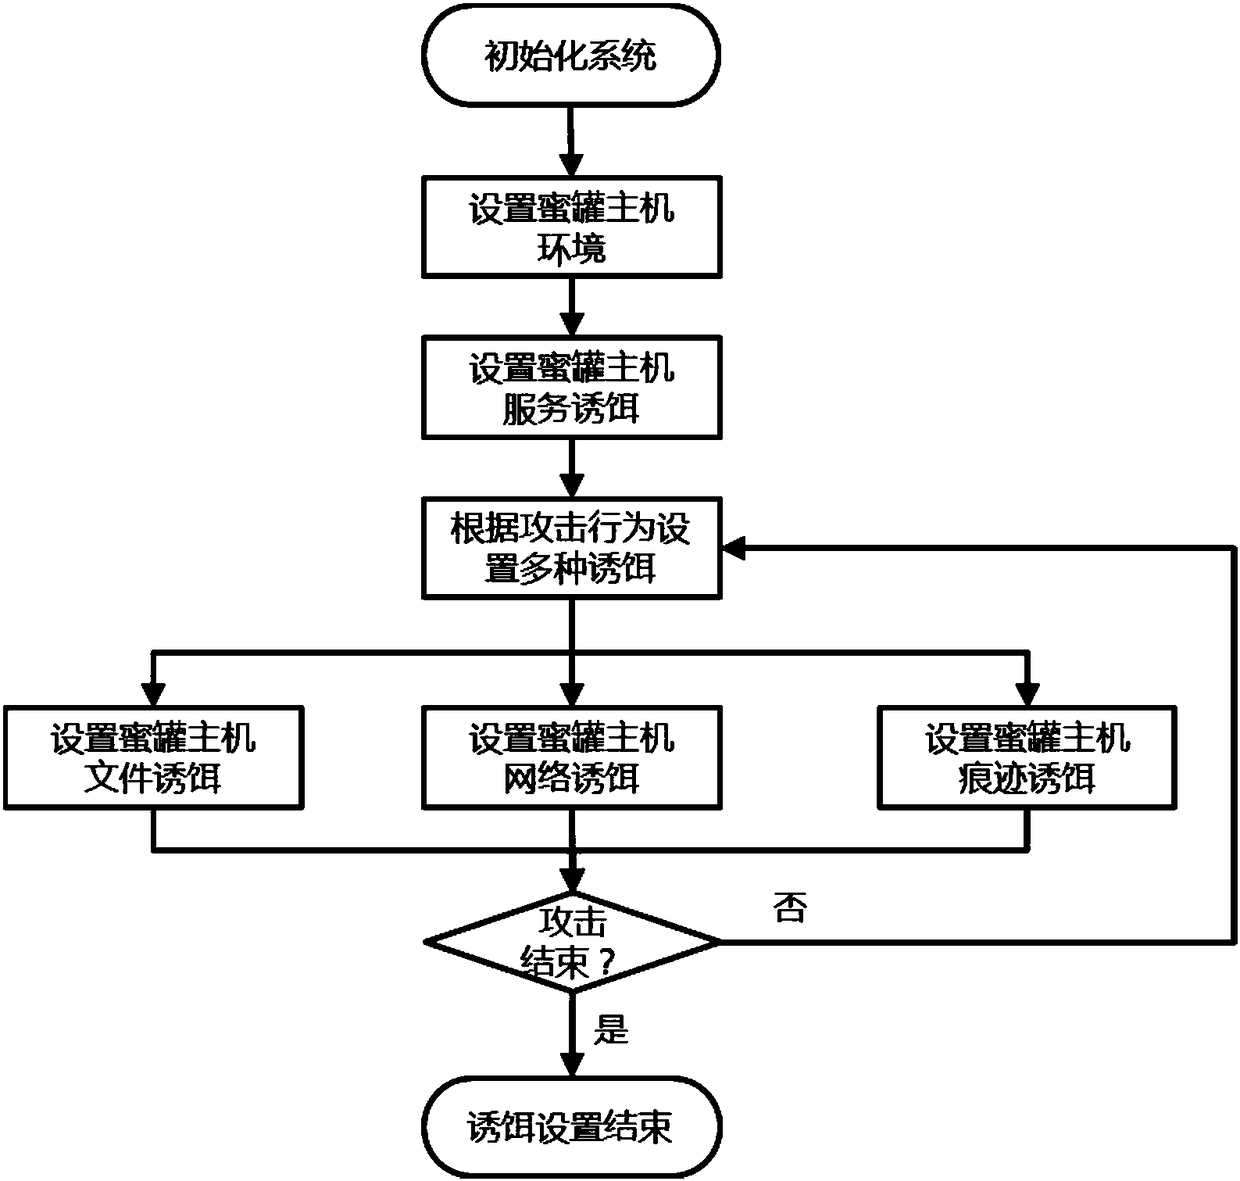 Multi-dimensional cheating bait implement system and method based on honey pot technology